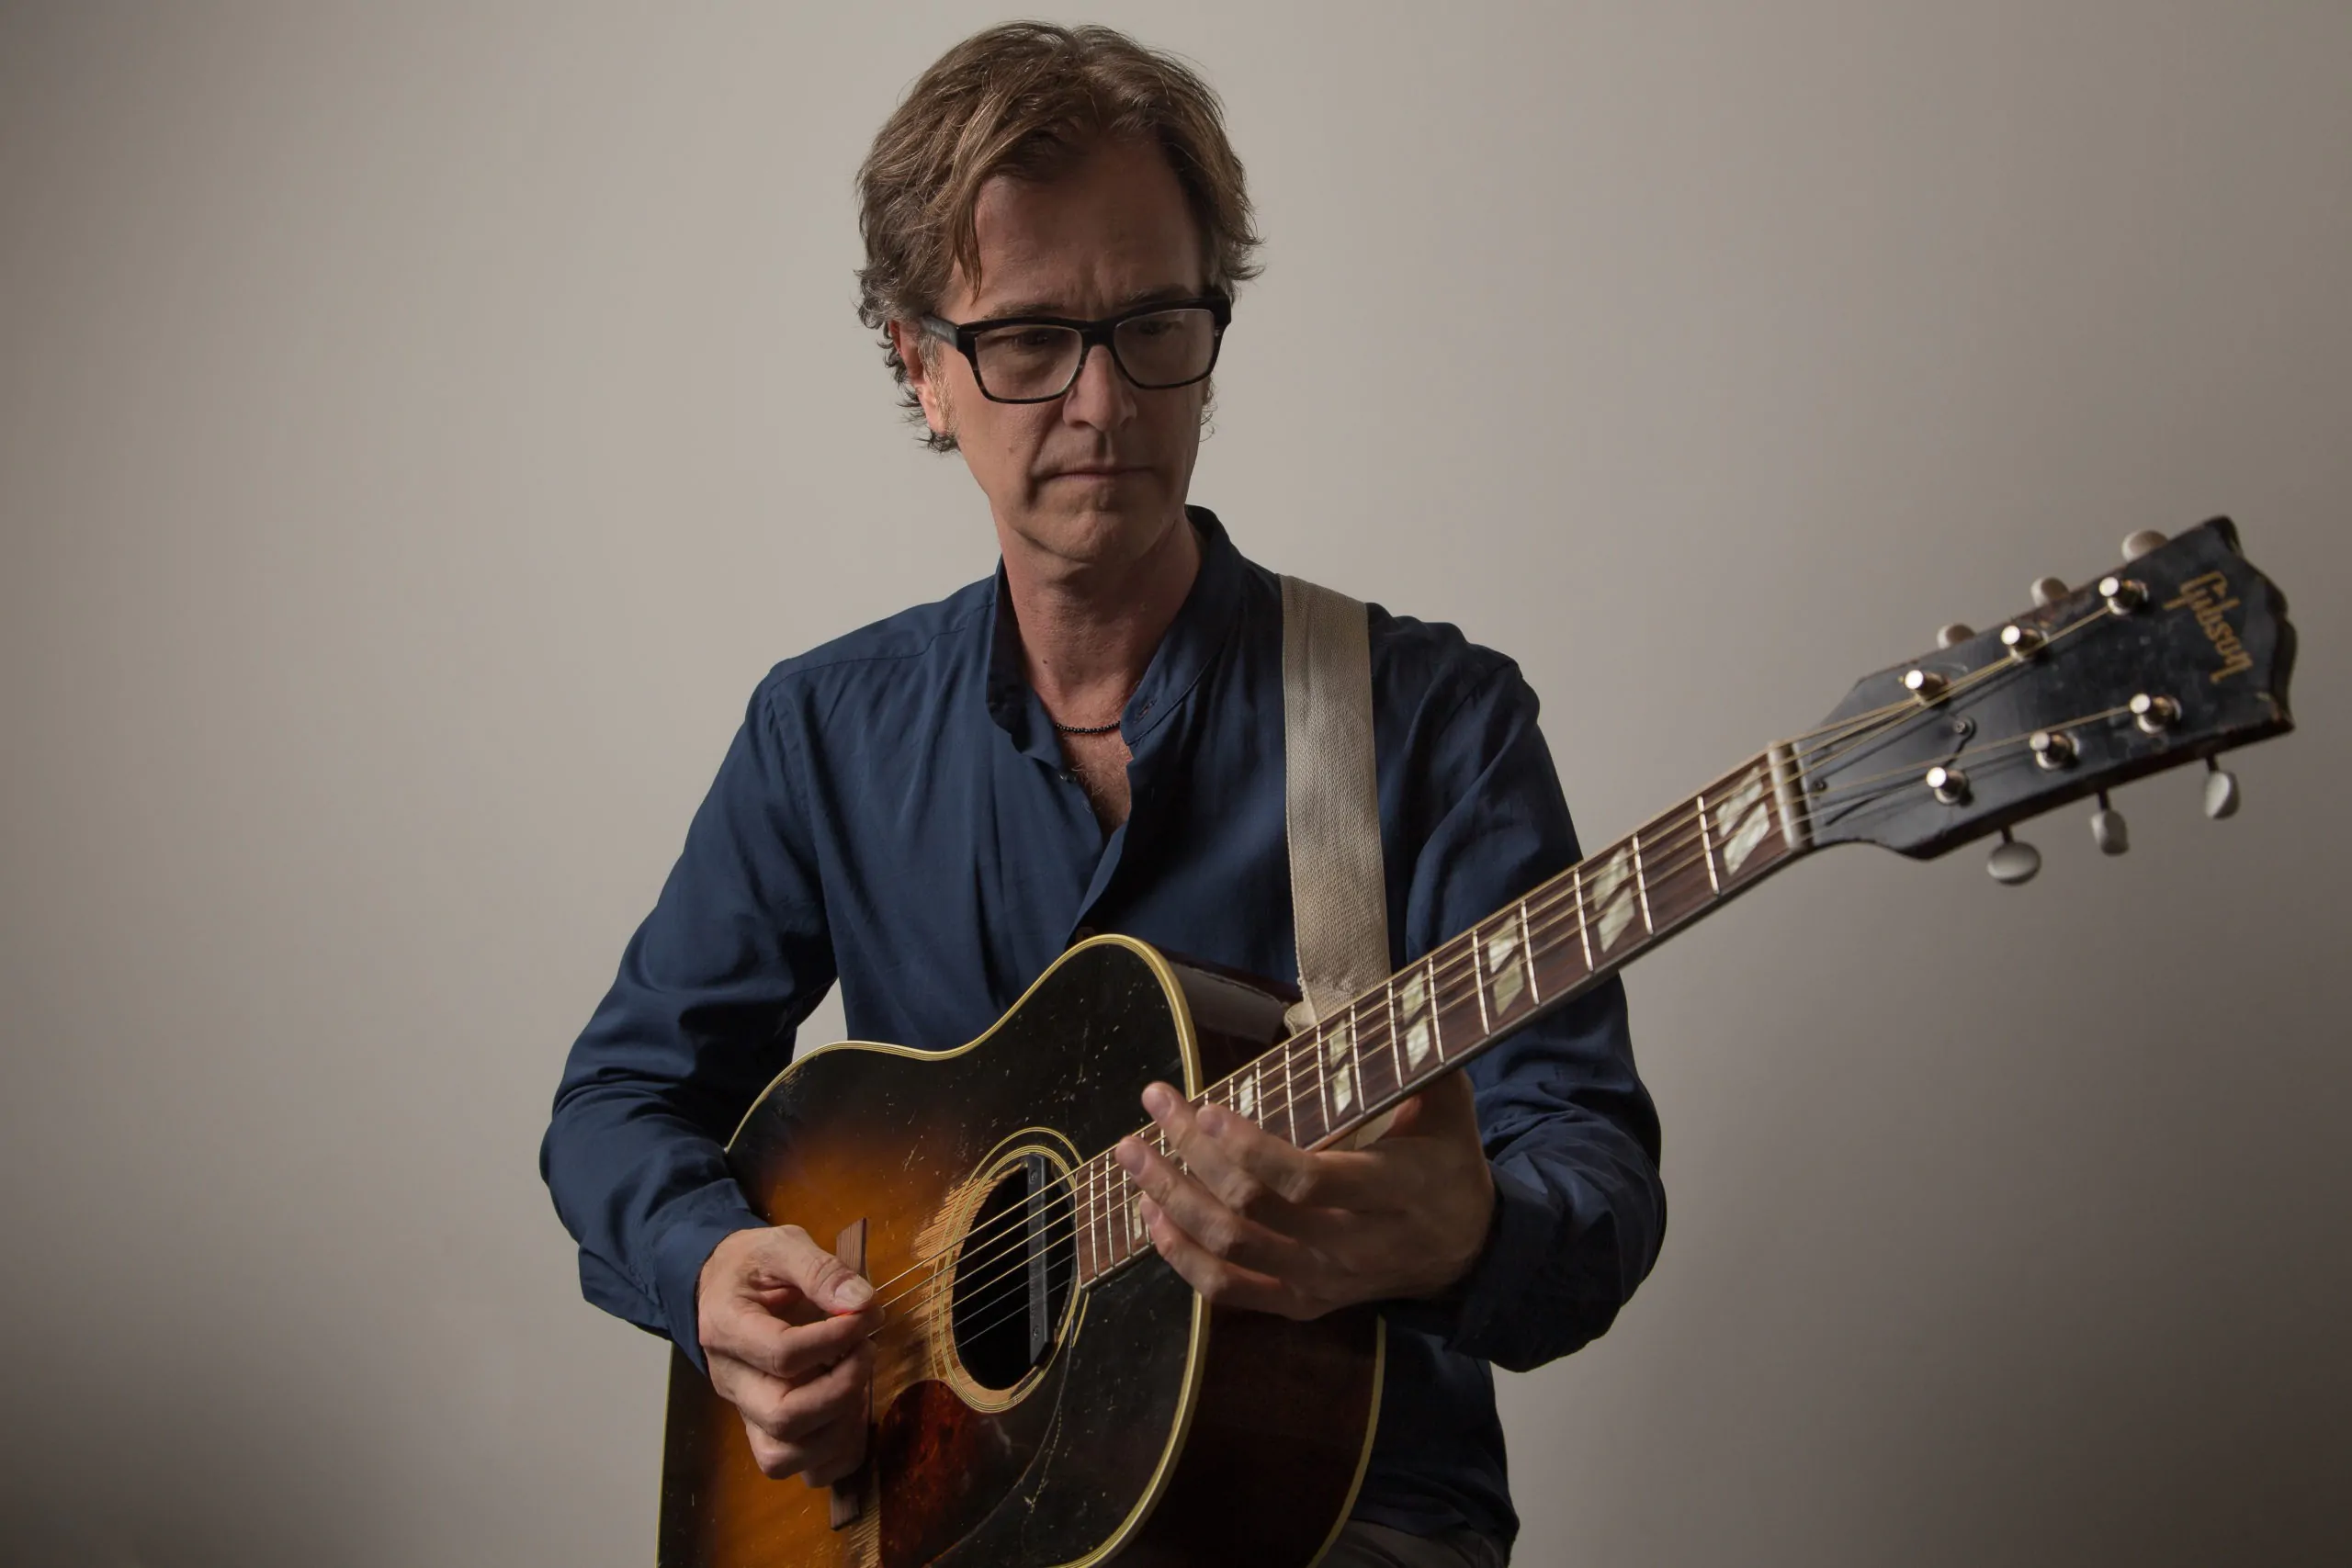 DAN WILSON Asks “What If We Survive This?” In New Single “The Real Question”